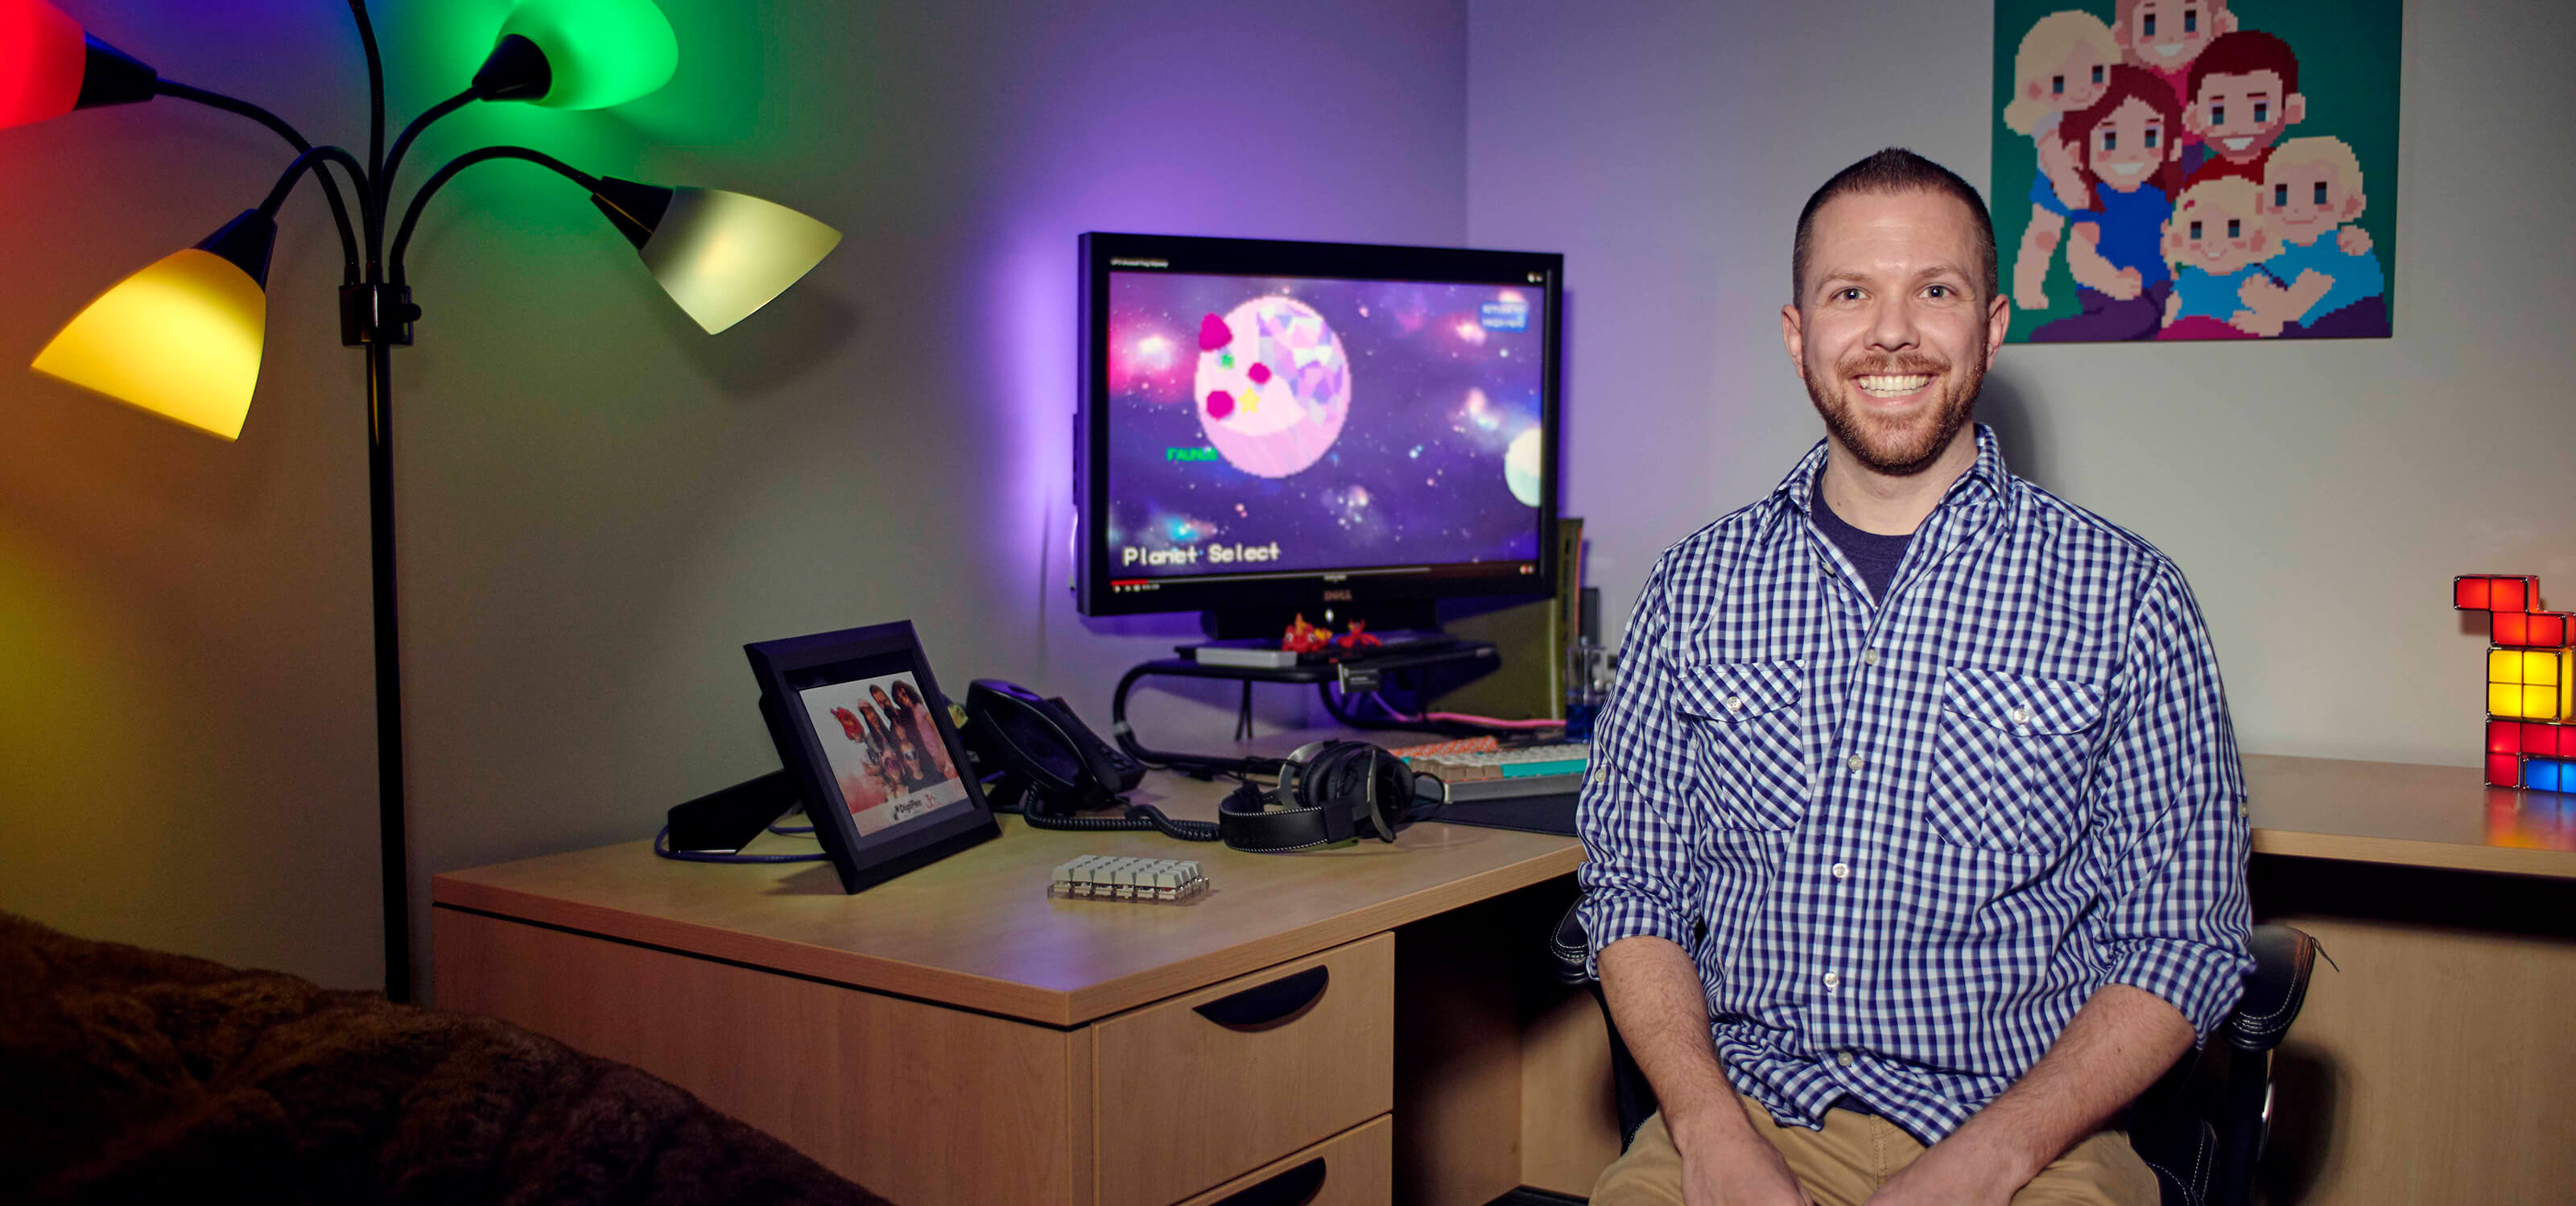 Justin Chambers smiles facing camera at his office desk, dark room decorated with objects and illuminated by colorful lamps.